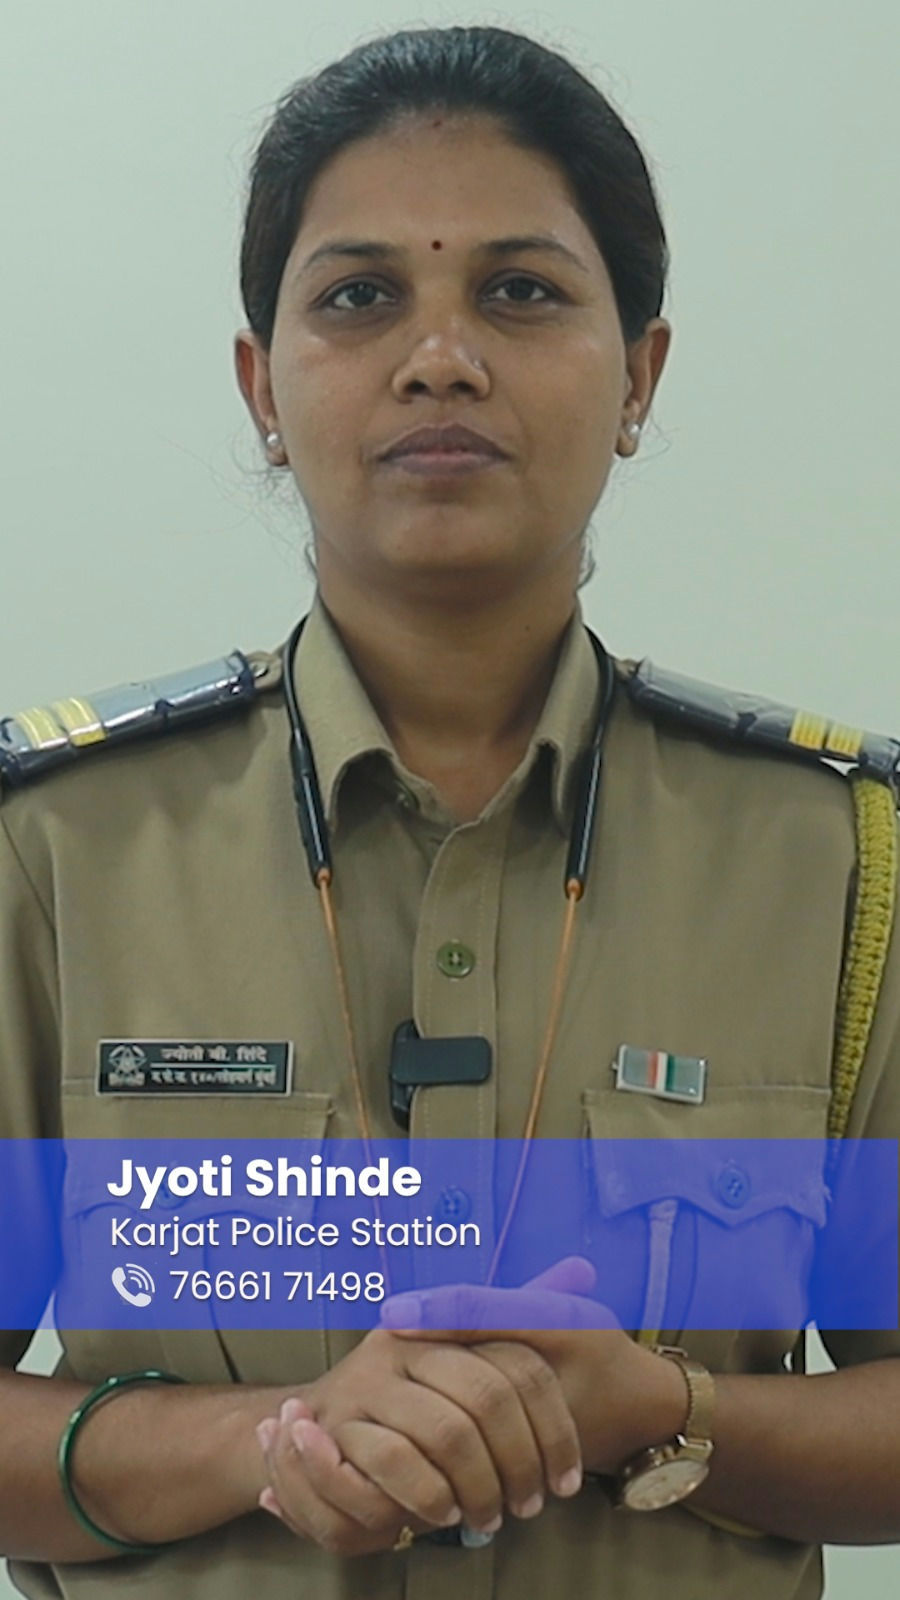 Meet our Khakitali Sakhee - Jyoti. 

Whenever you feel unsafe, your friend is a call away. Save her contact number right away

# # 